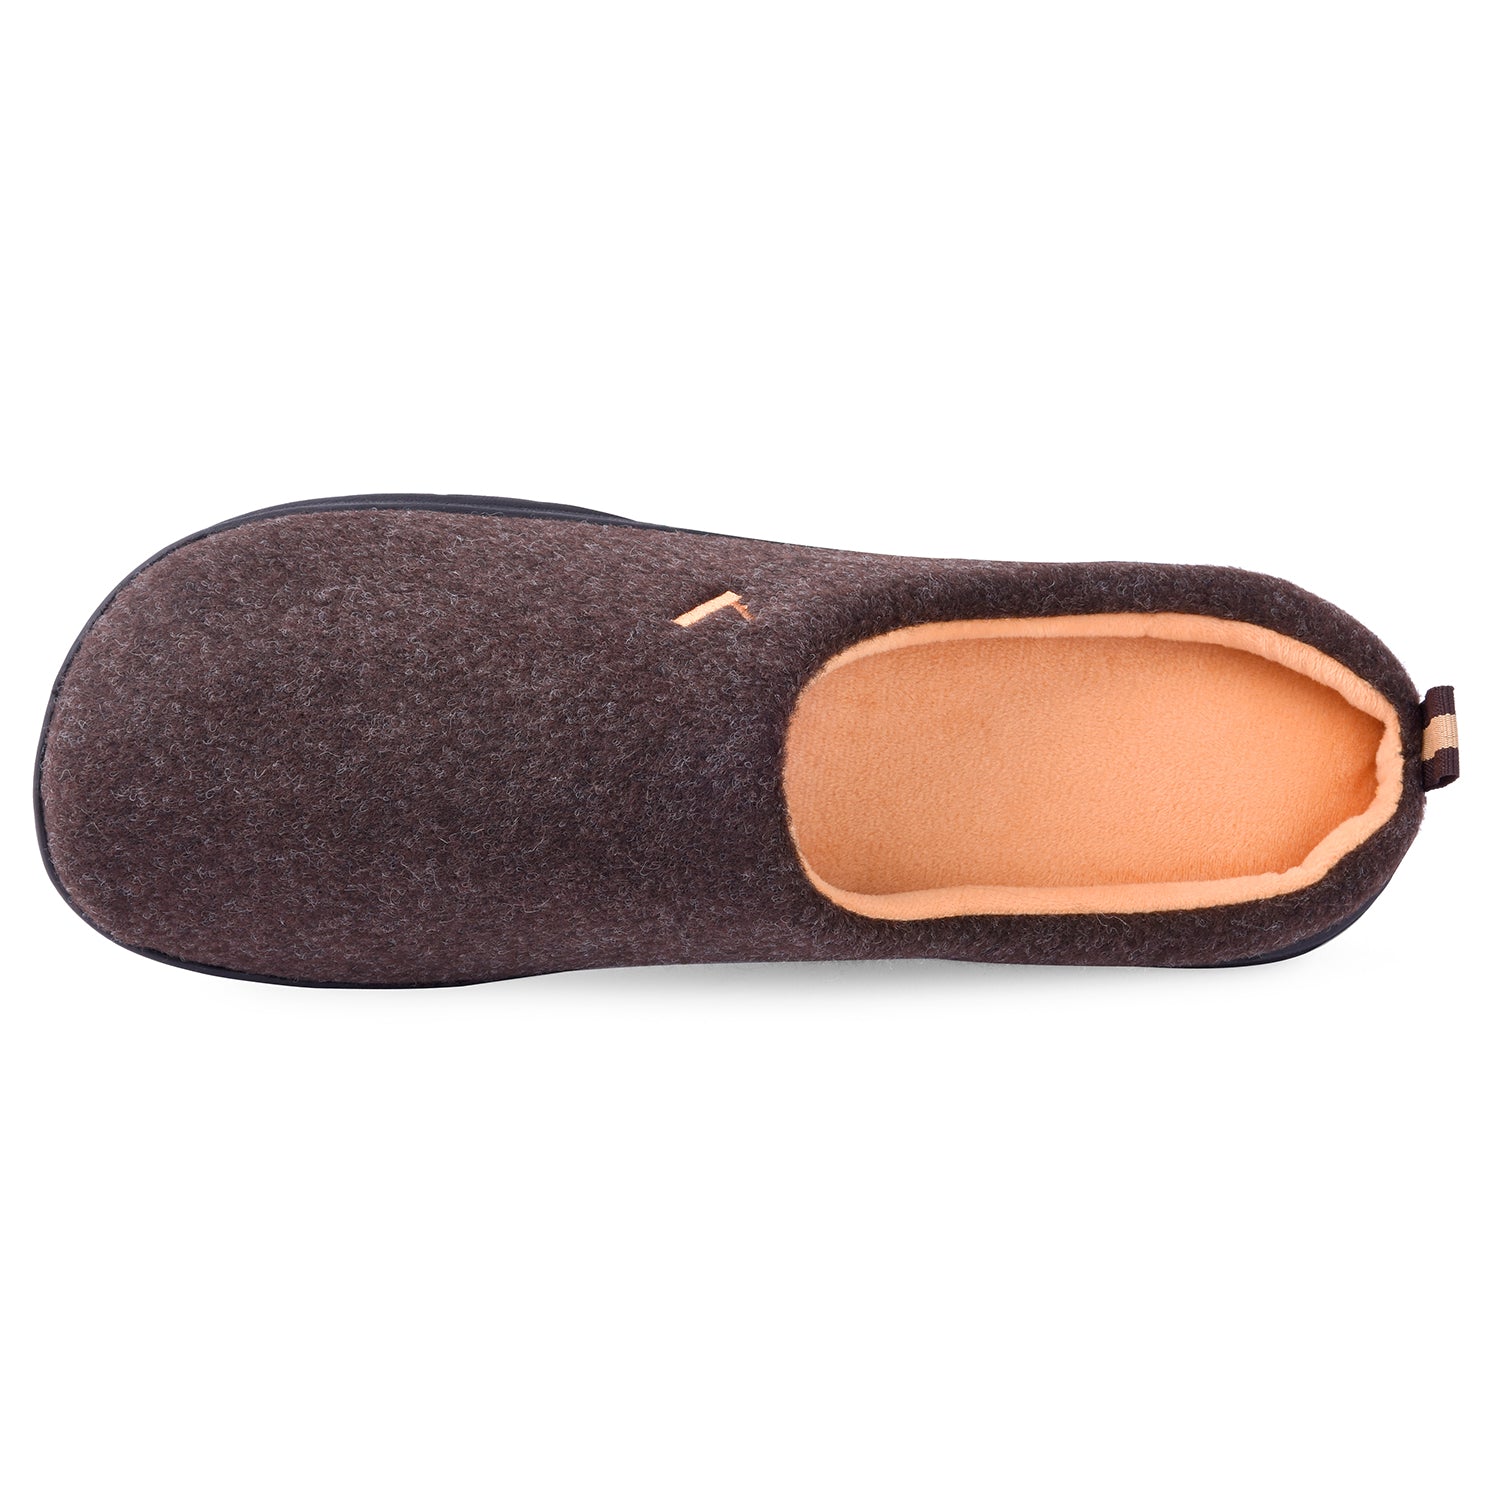 slip on house shoes